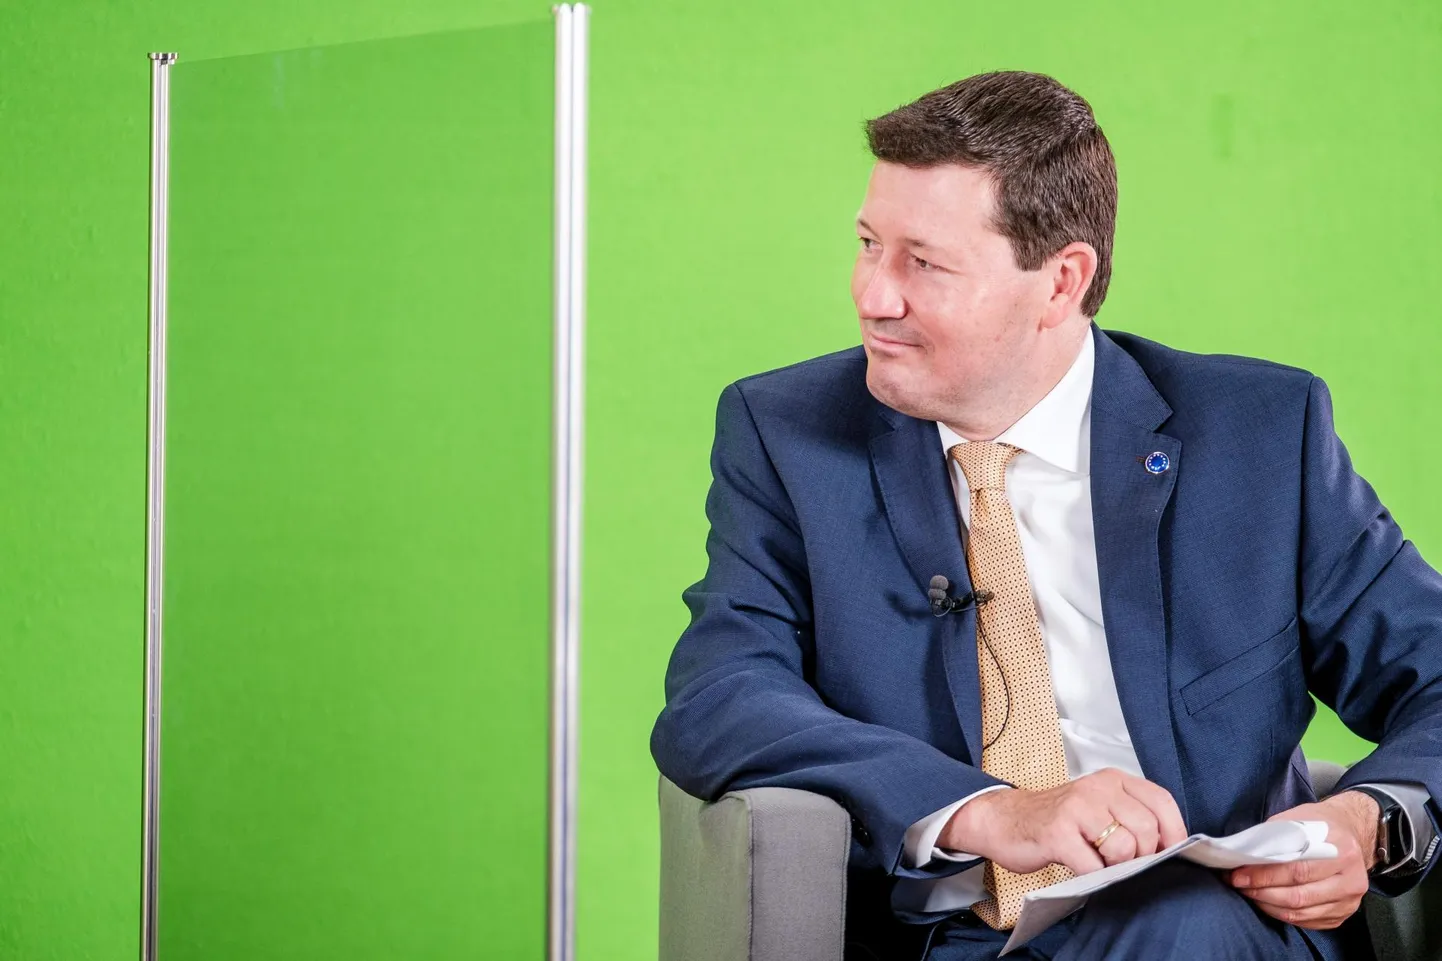 Some in Europe are sometimes too impressed by the propaganda of autocratic countries, Martin Selmayr, head of the EU Commission Representation in Vienna, says.